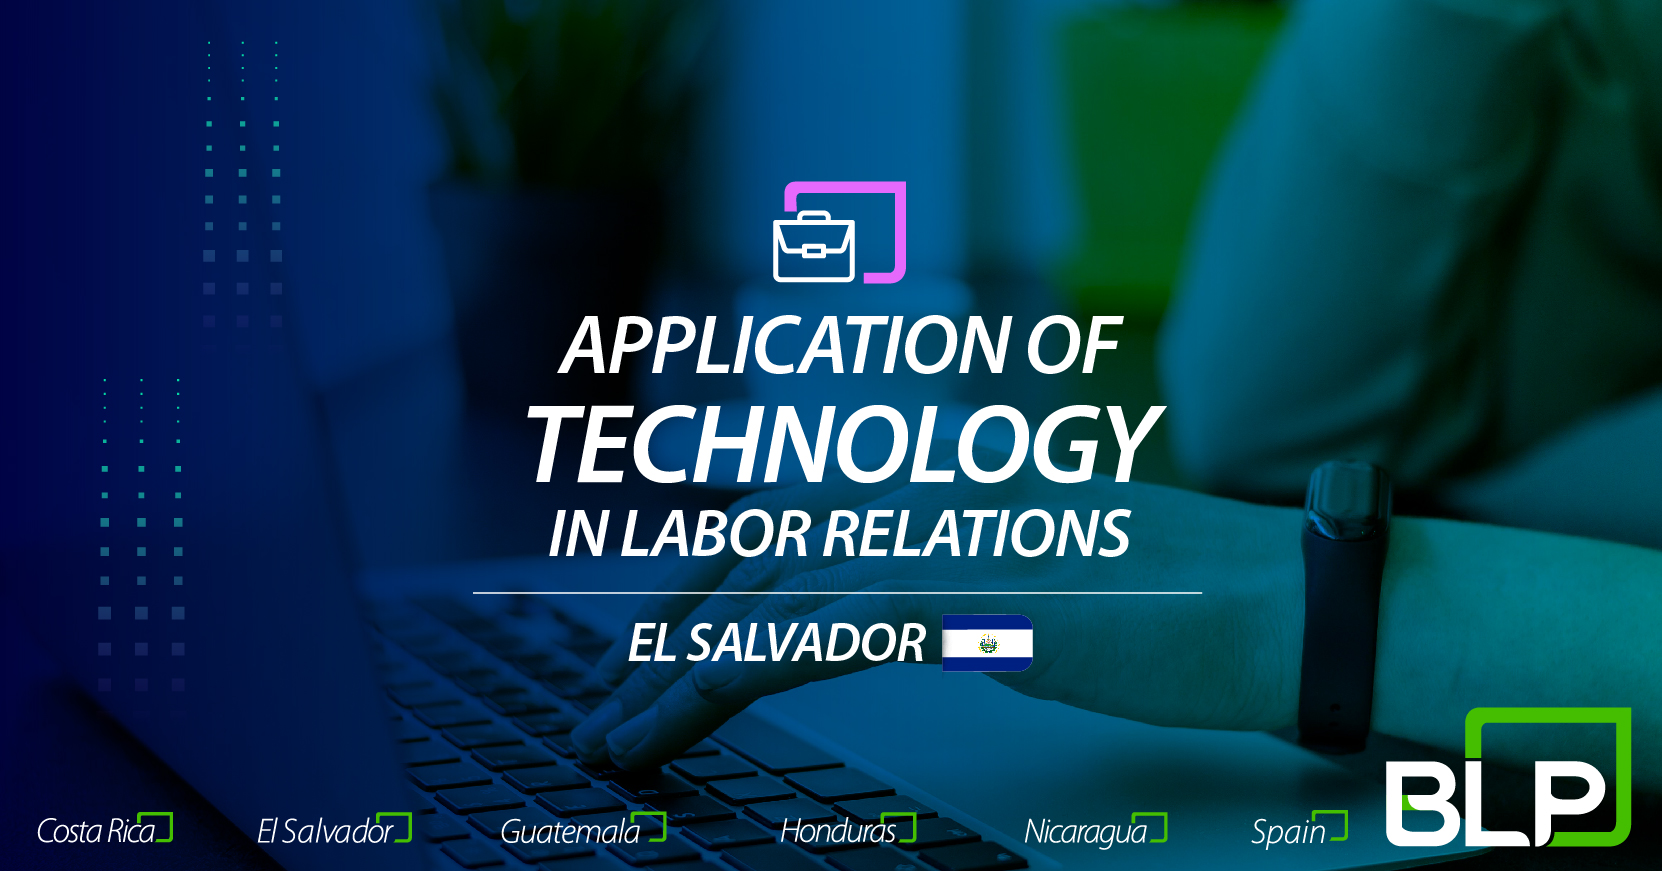 Application of technology in labor relations: perspectives from El Salvador